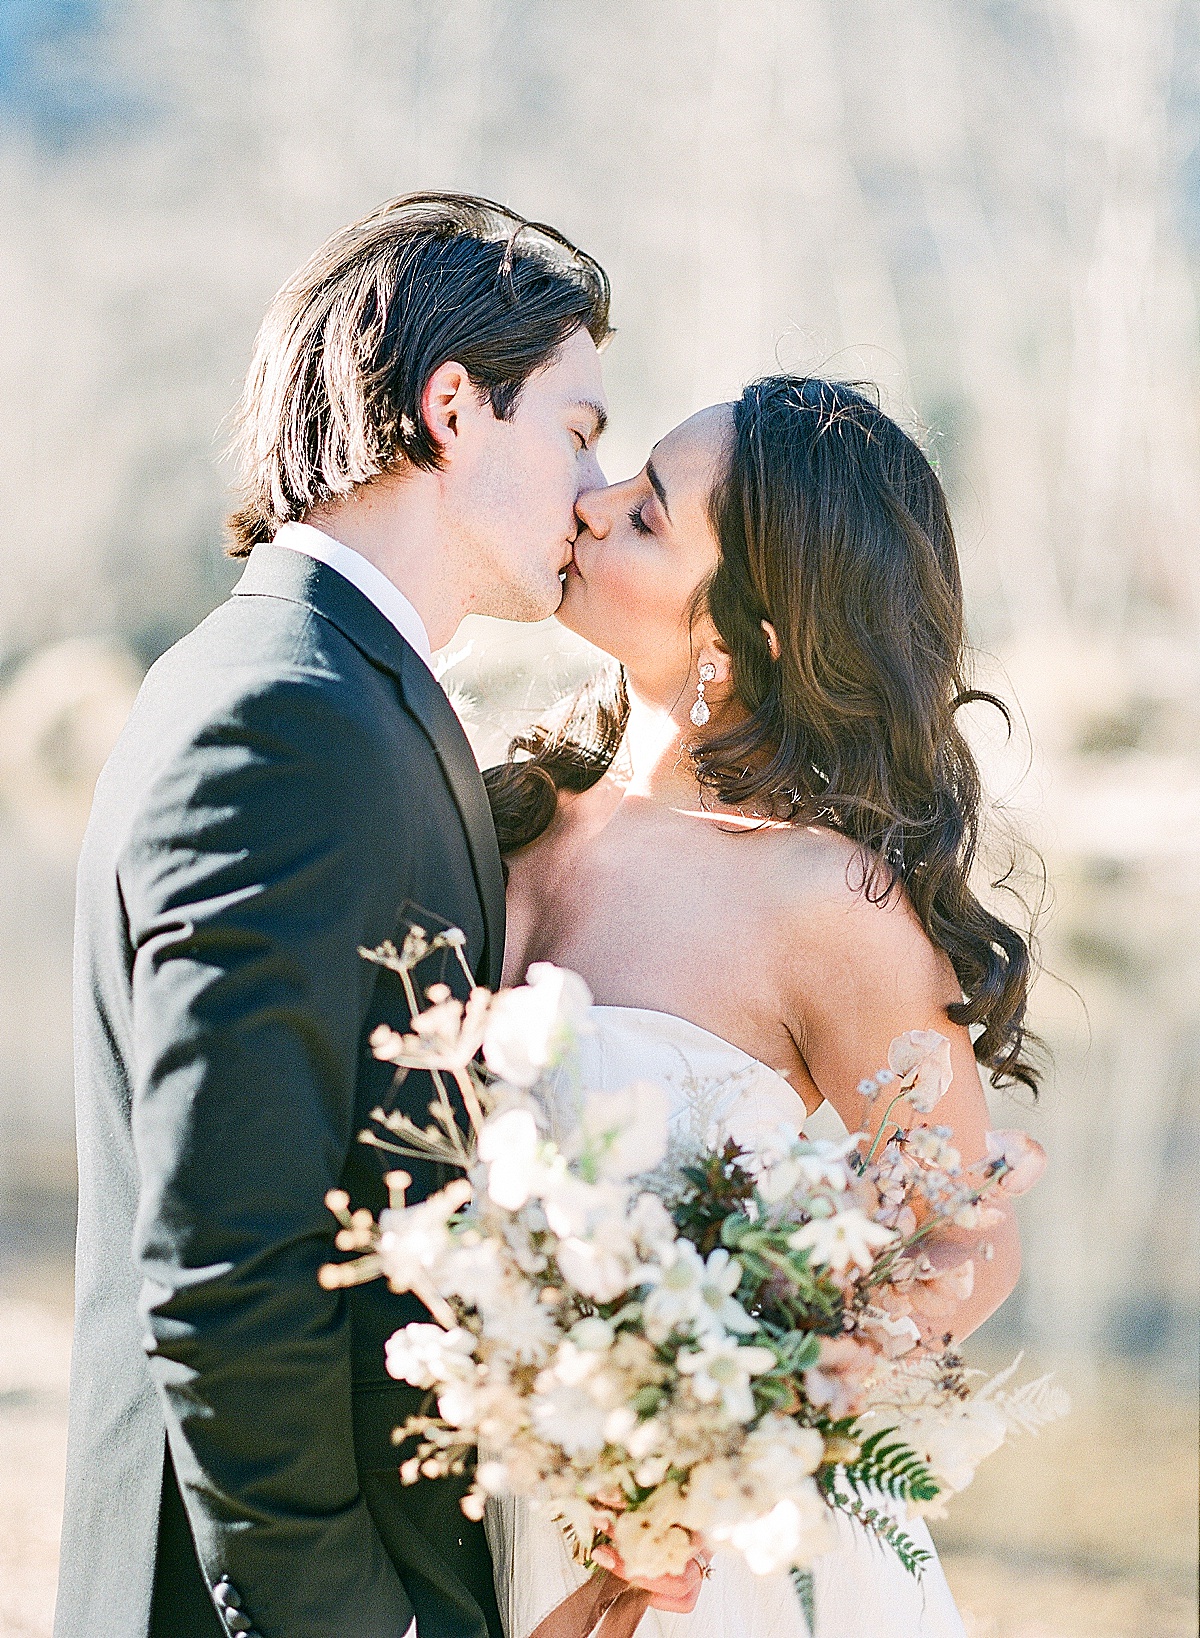 7 Reasons Why We Still Shoot Film Bride and Groom Kissing Photo